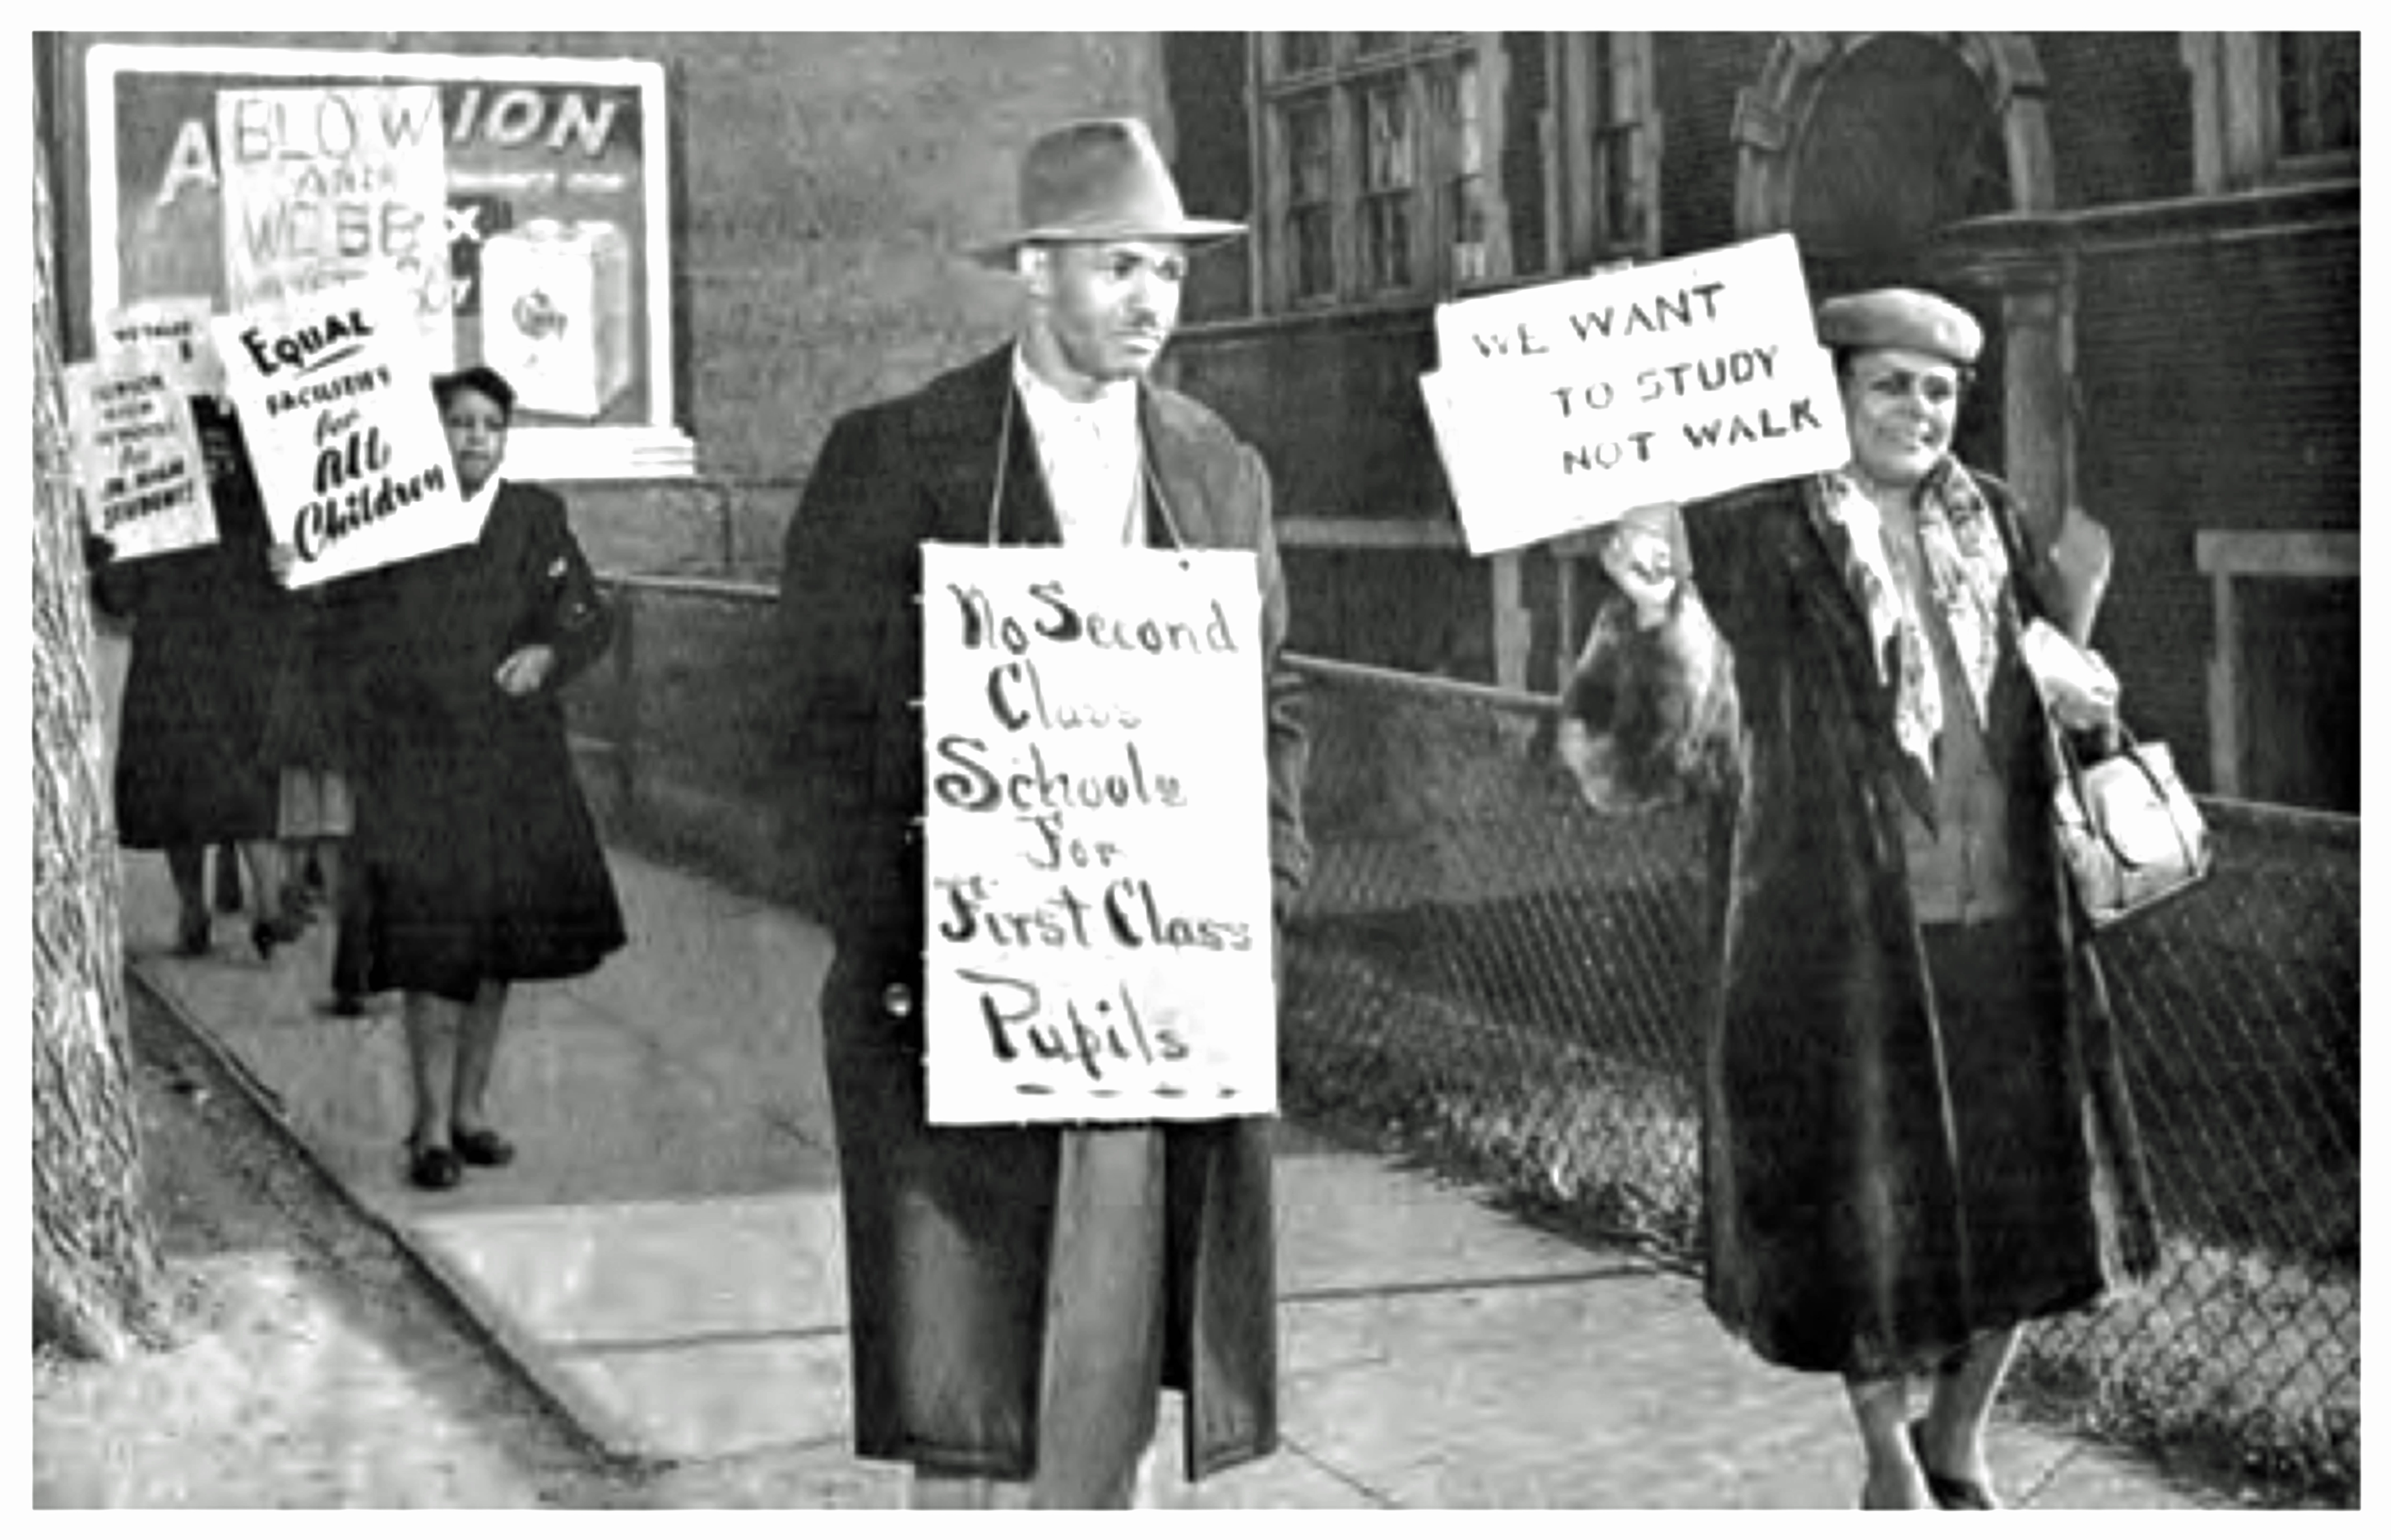 people picketing with signs that protest segregation